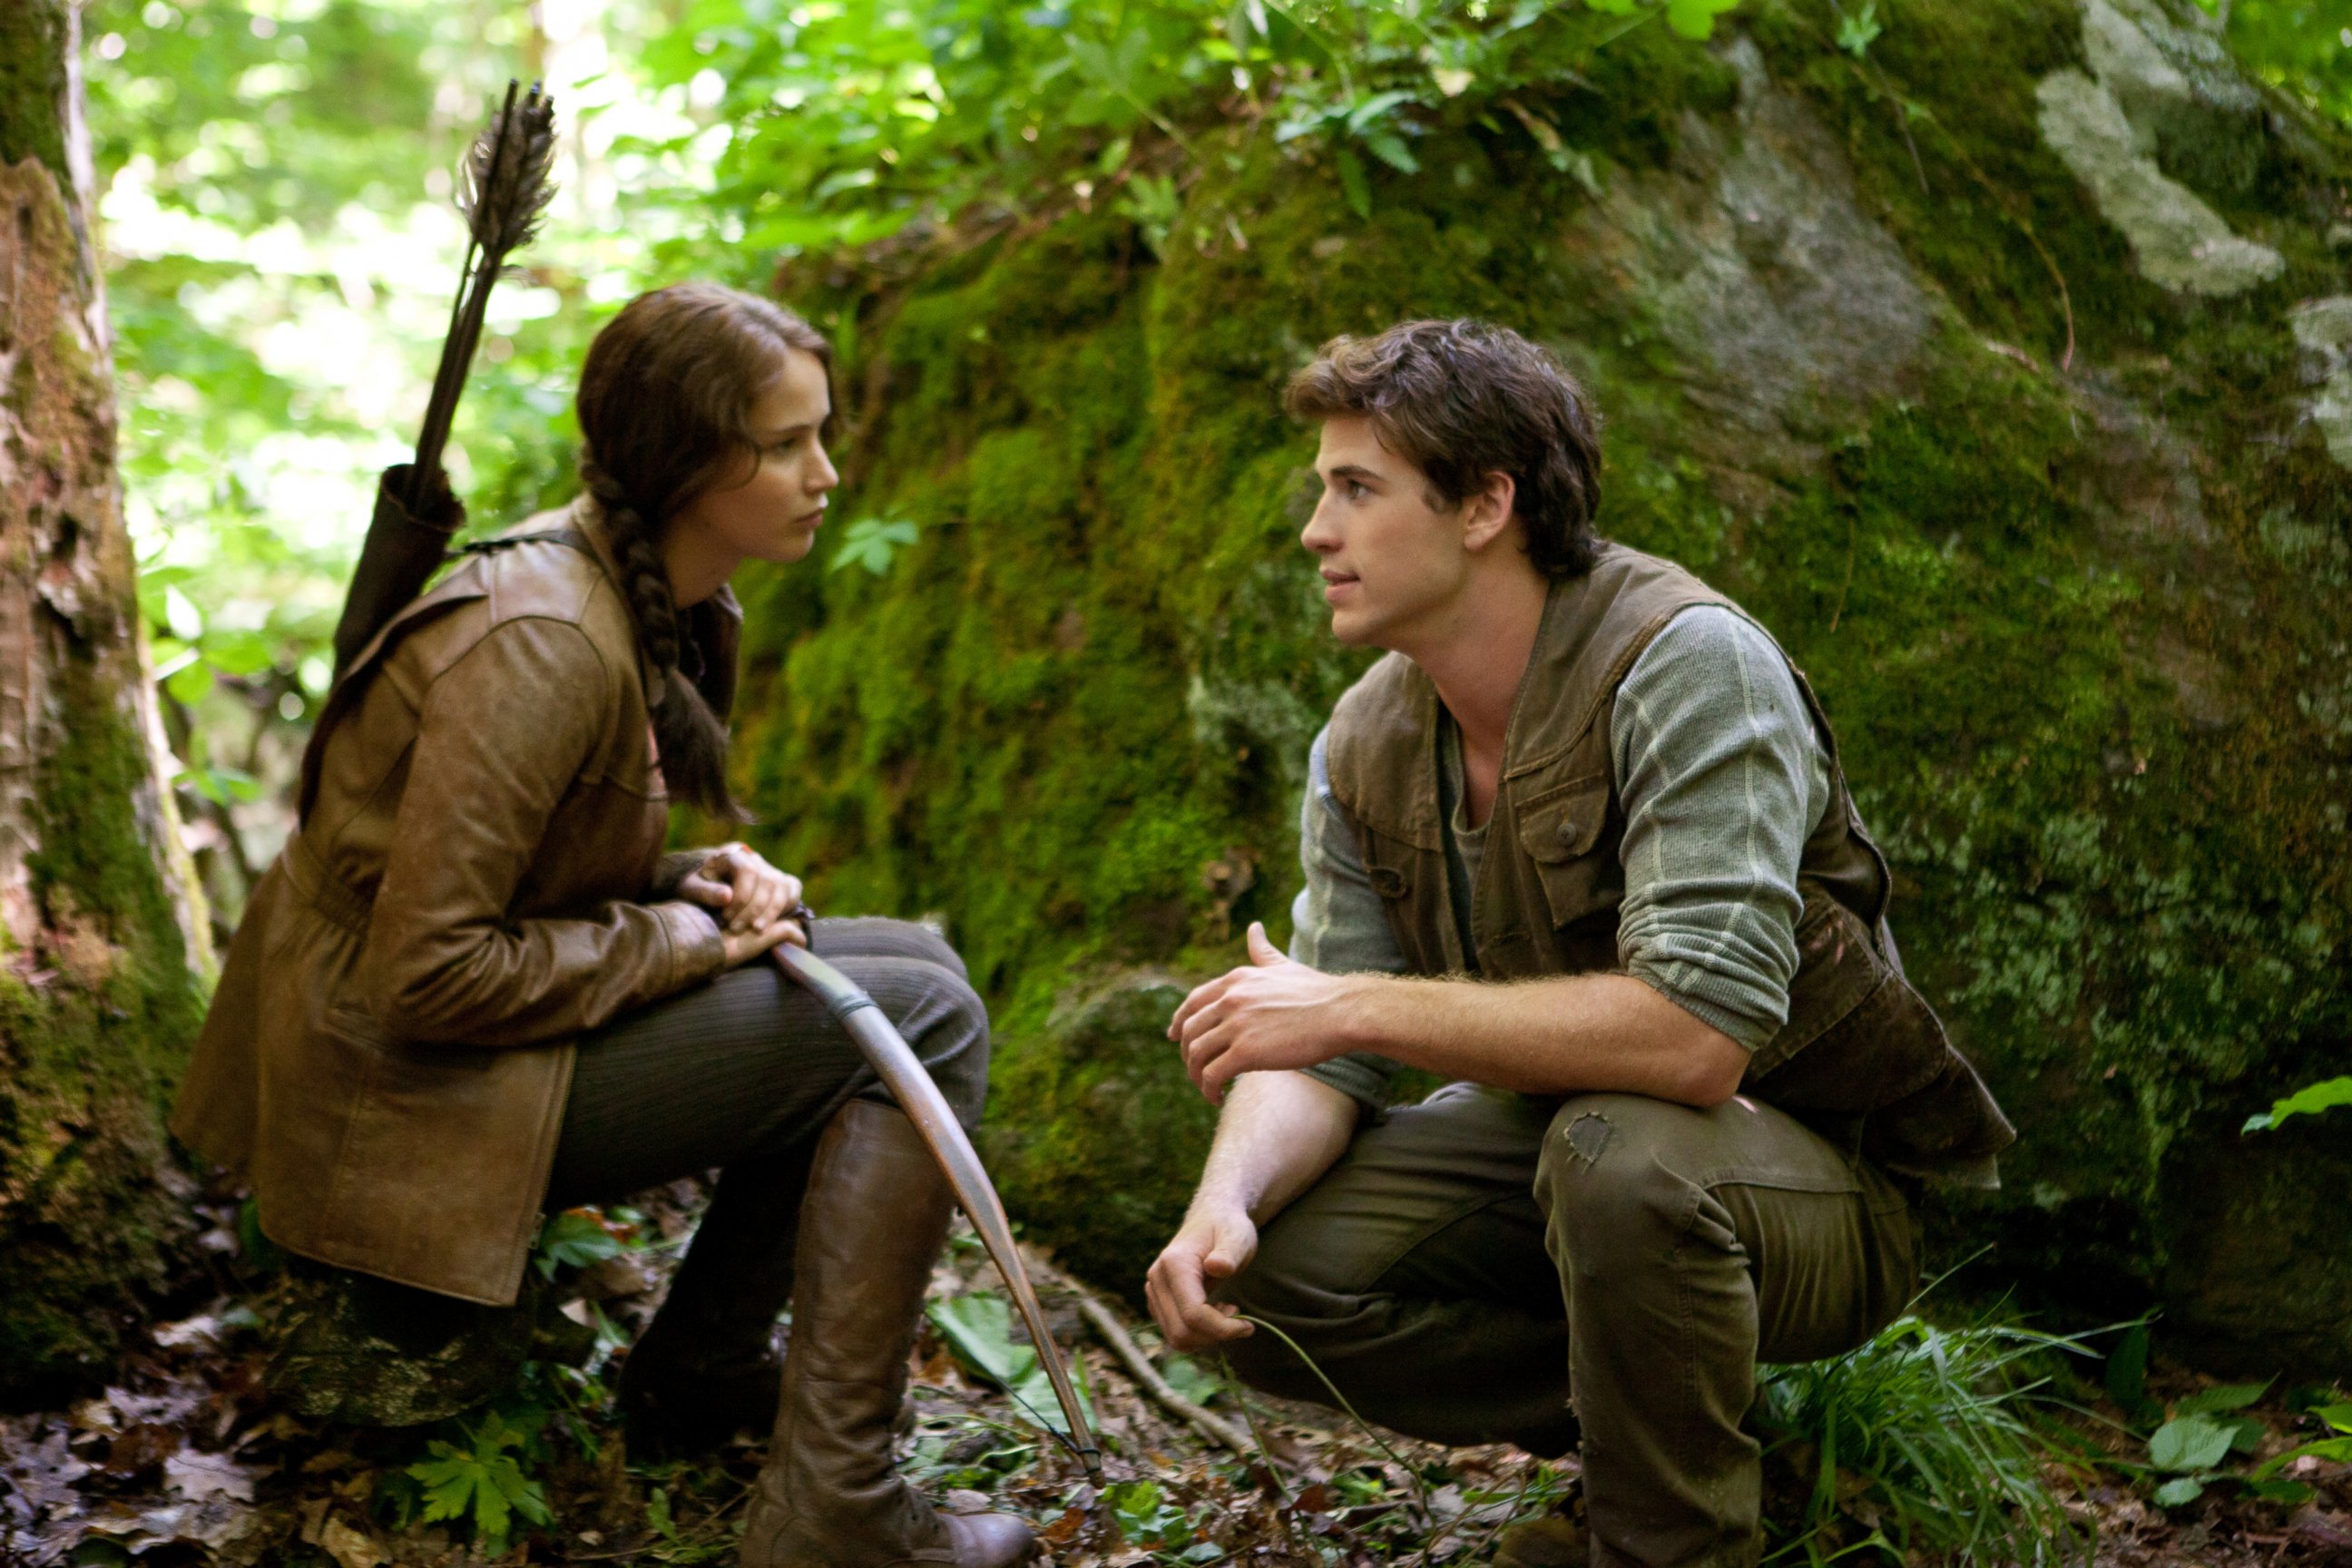 PHOTO: Katniss Everdeen (Jennifer Lawrence) and Gale Hawthorne (Liam Hemsworth) in The Hunger Games.